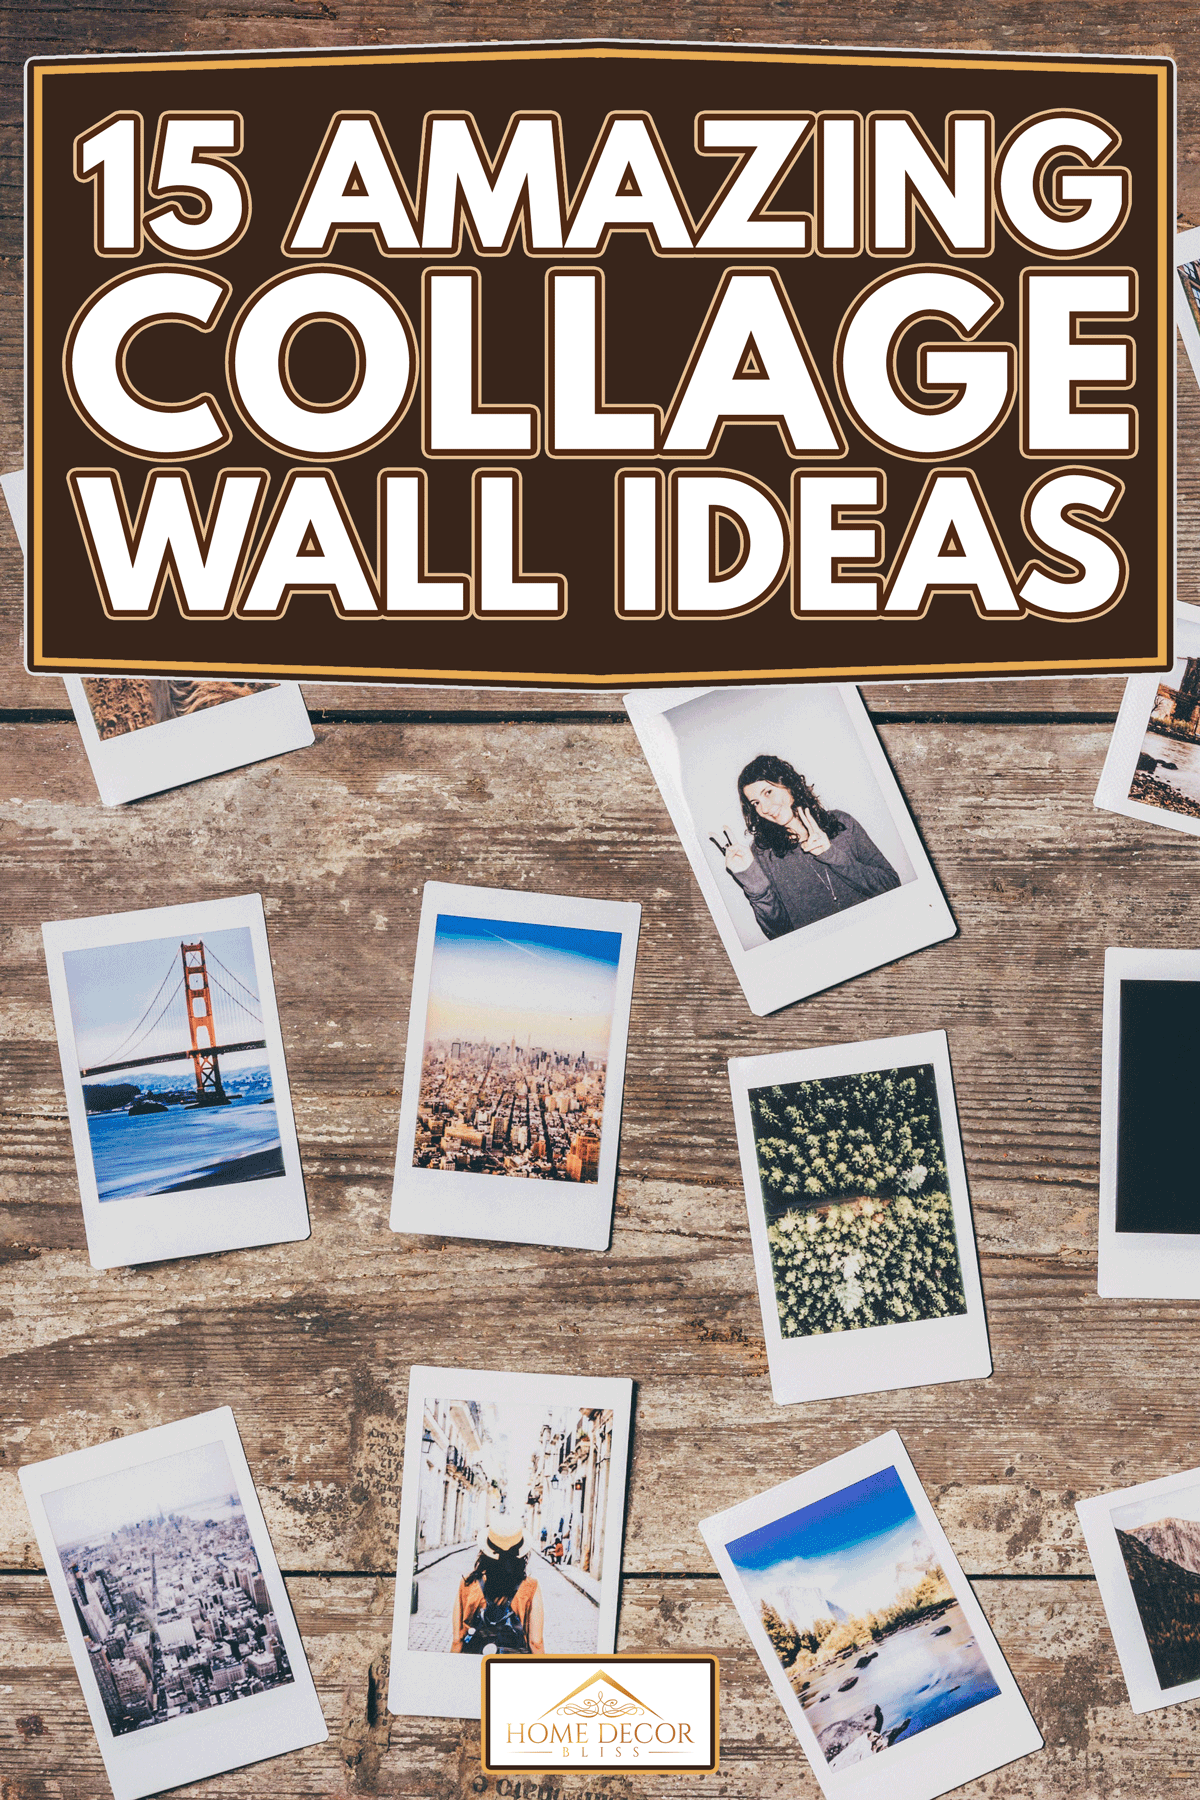 Instant camera prints on a wall, 15 Amazing Collage Wall Ideas